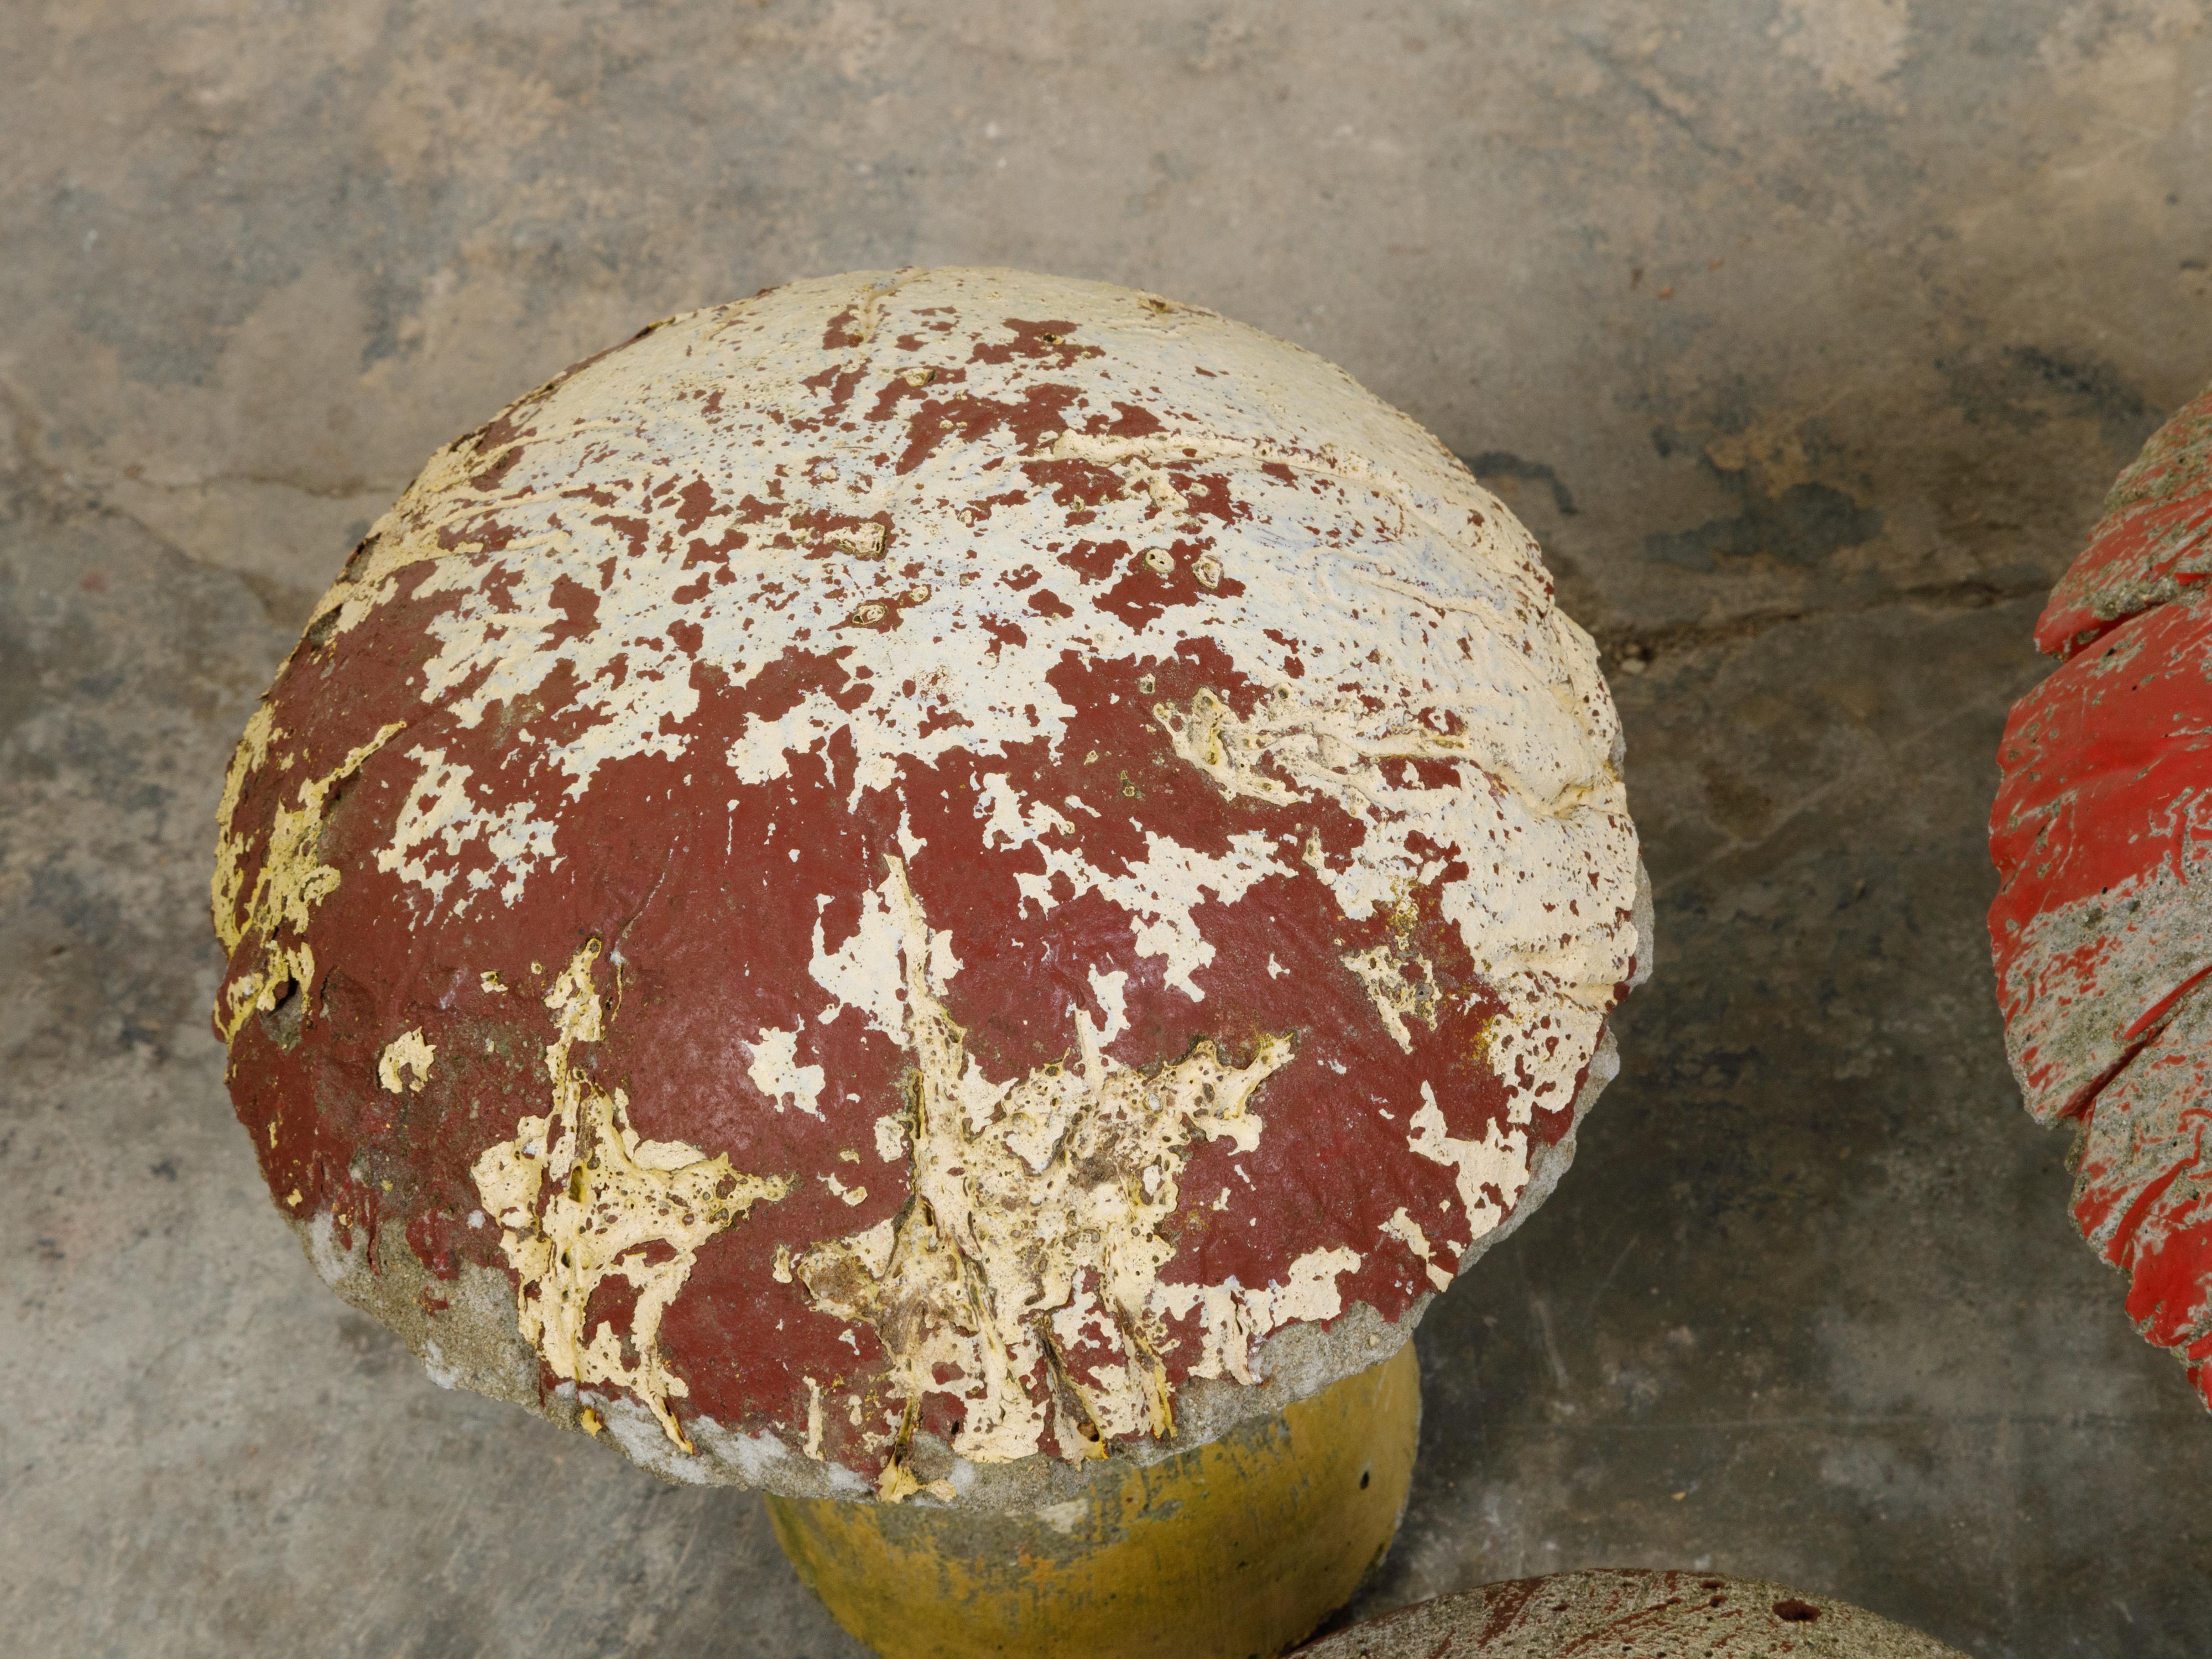 Rustic Set of Three American Midcentury Concrete Mushrooms with Weathered Appearance